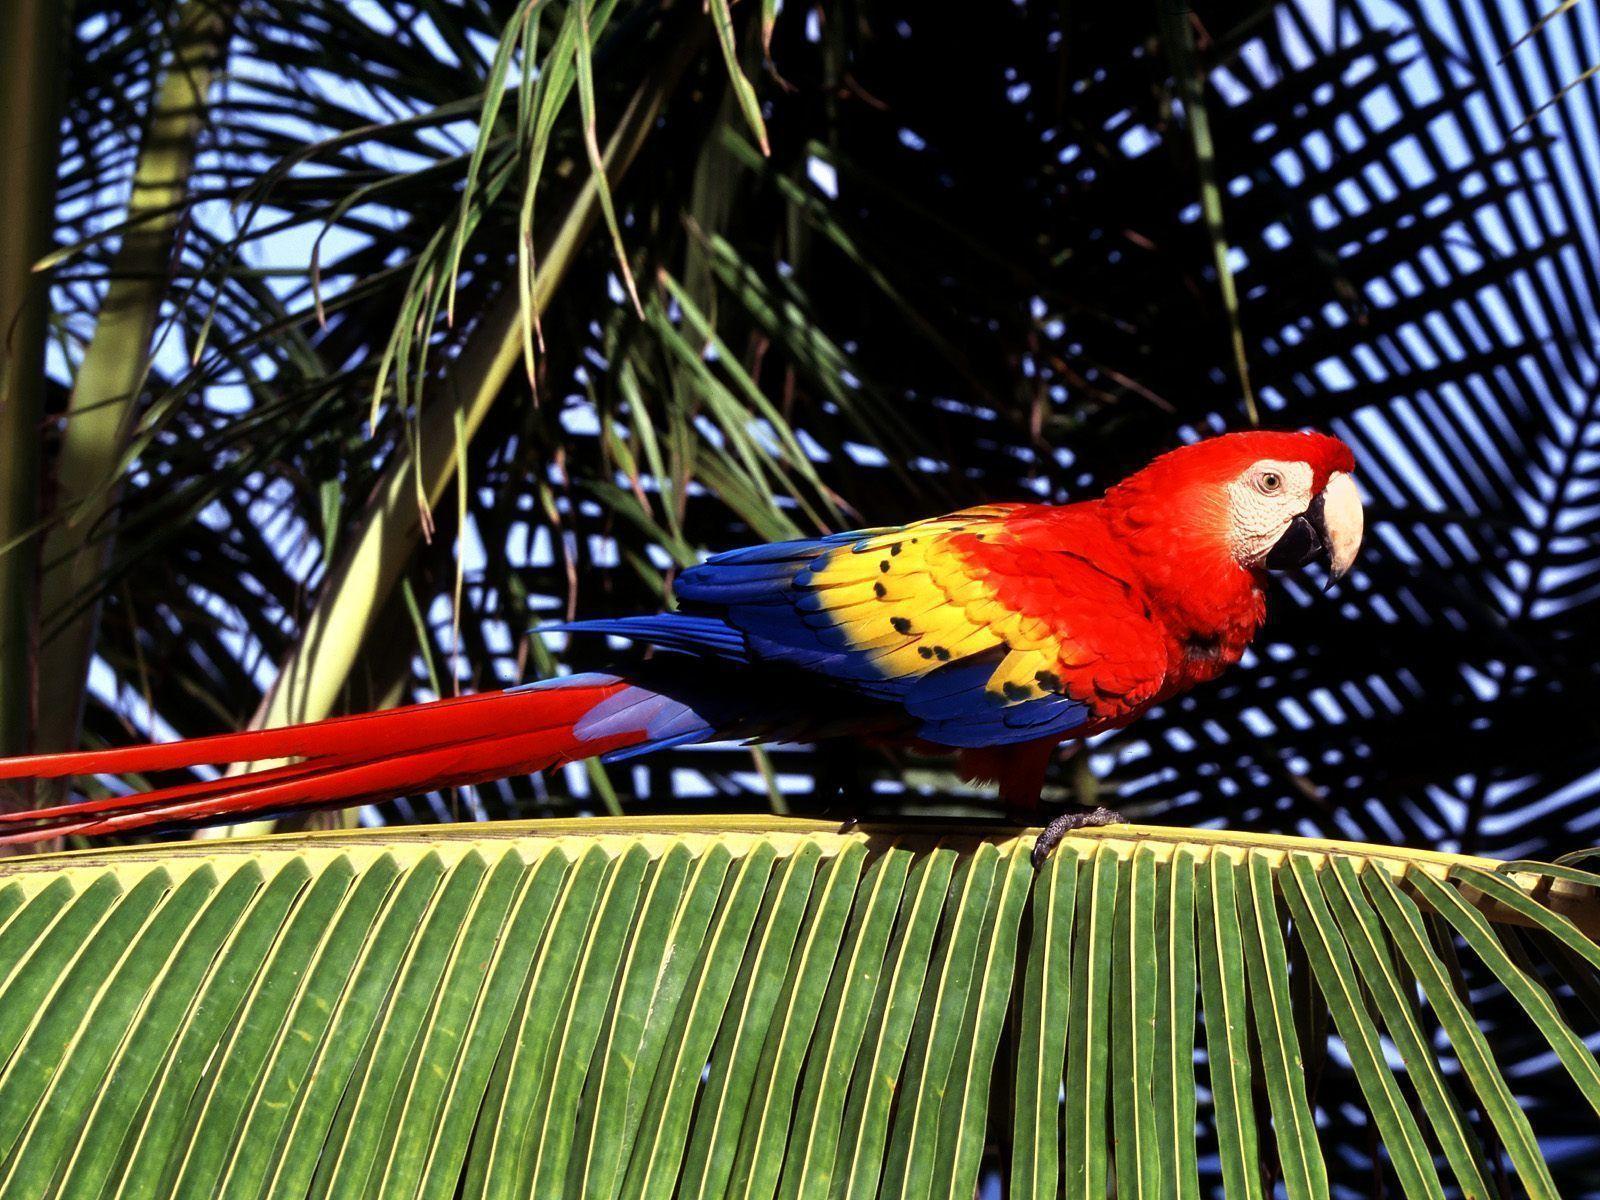 Scarlet Macaw Parrots Wallpaper. Scarlet Macaw Picture. New